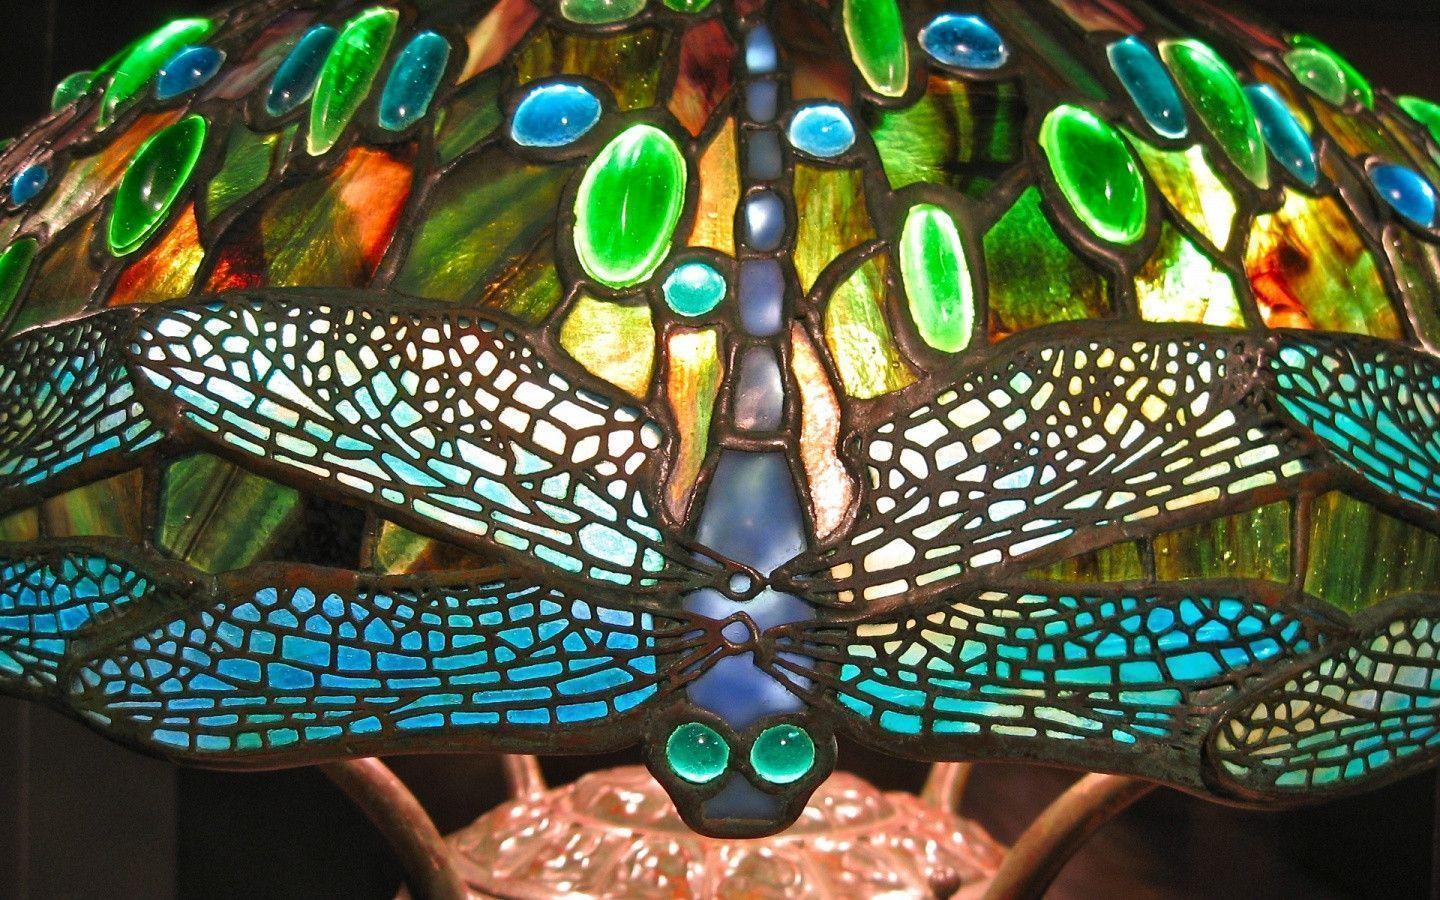 Dragonfly Stained Glass Windows 8 Wallpaper. Free Windows 8